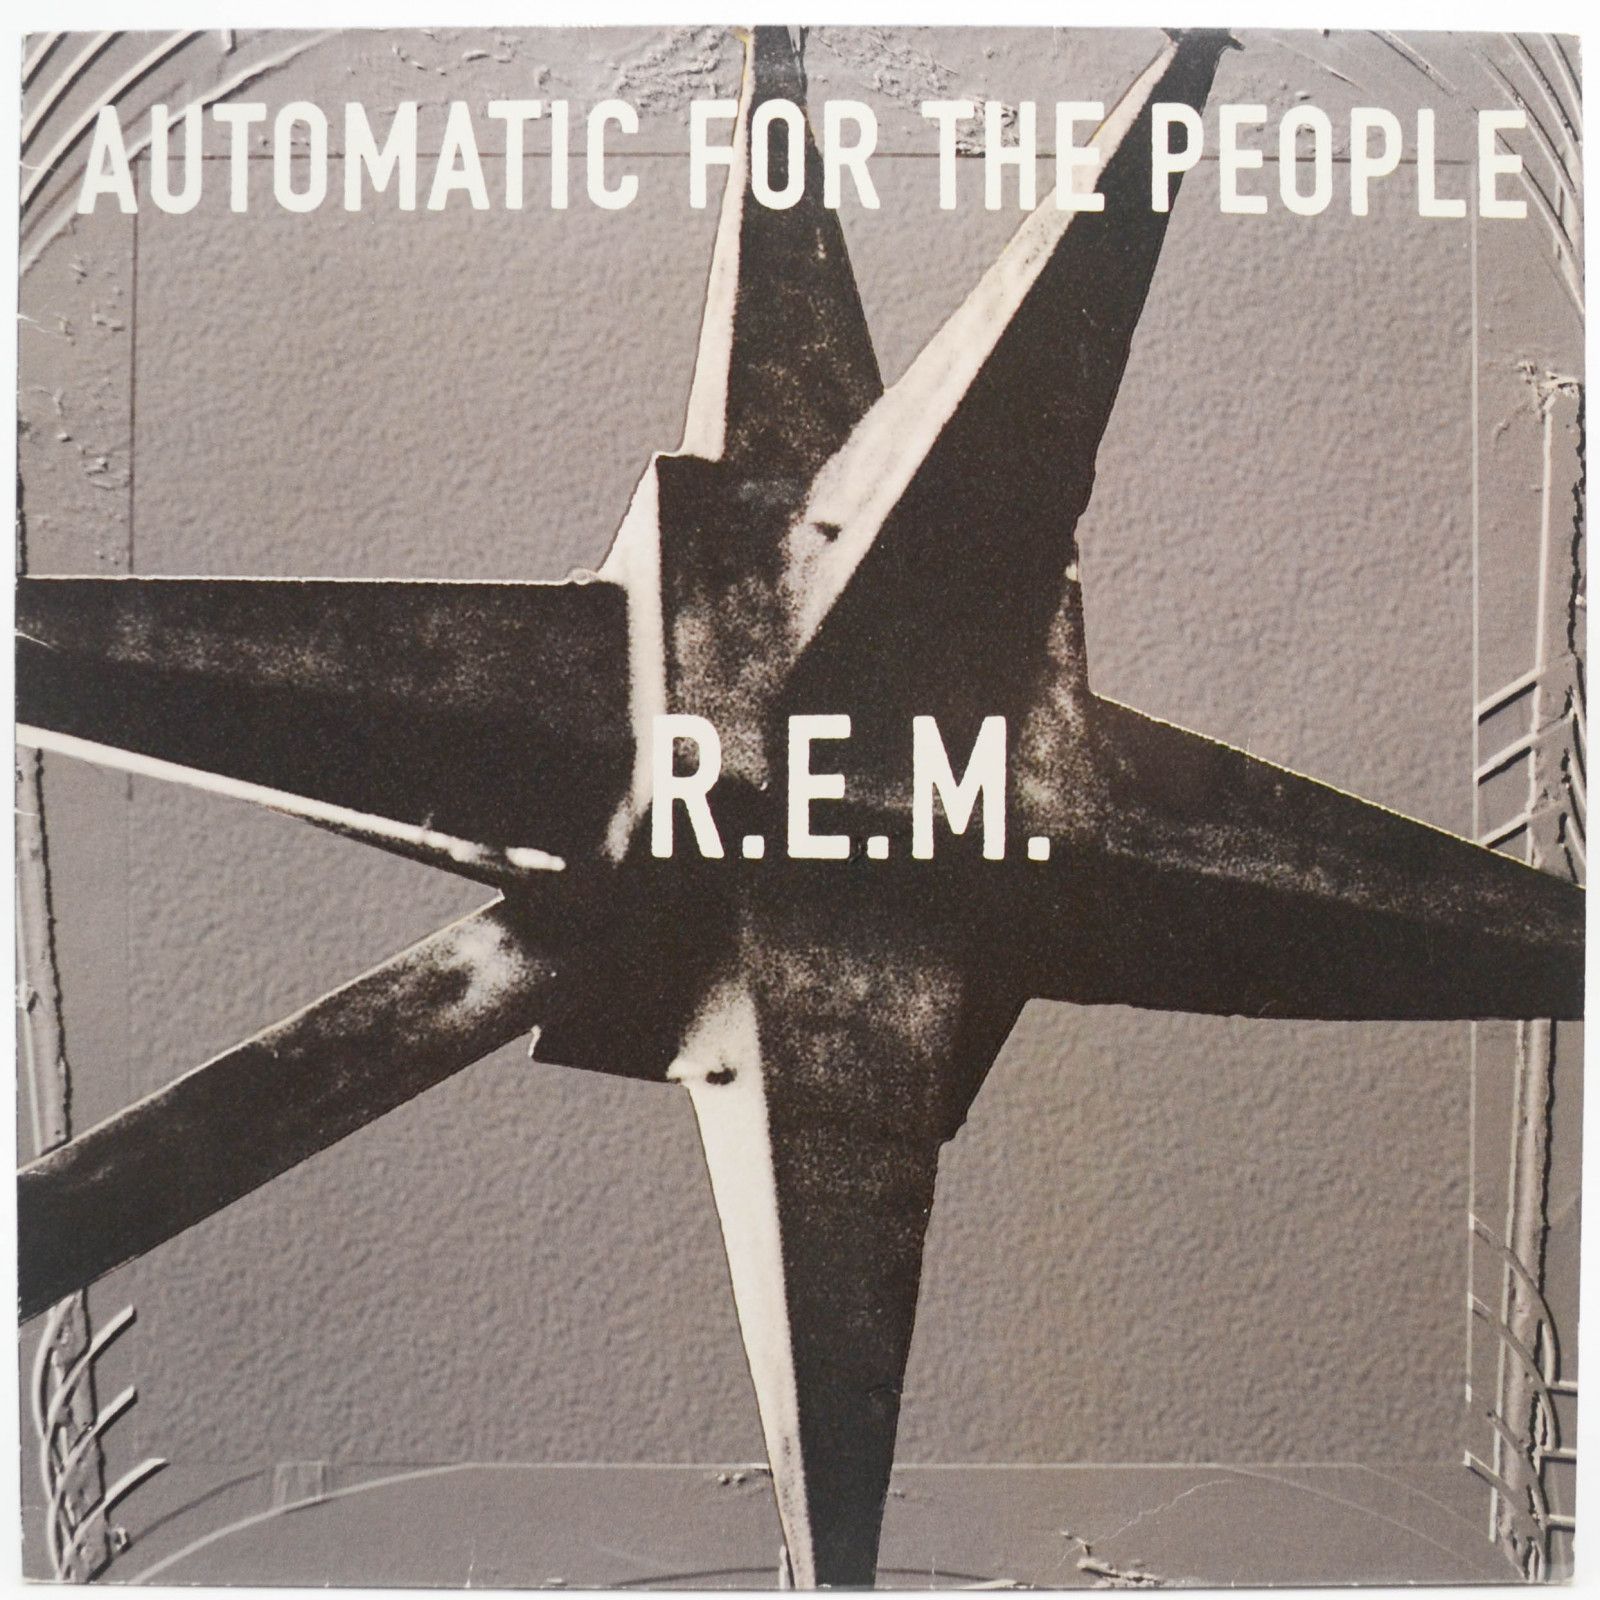 R.E.M. — Automatic For The People, 1992